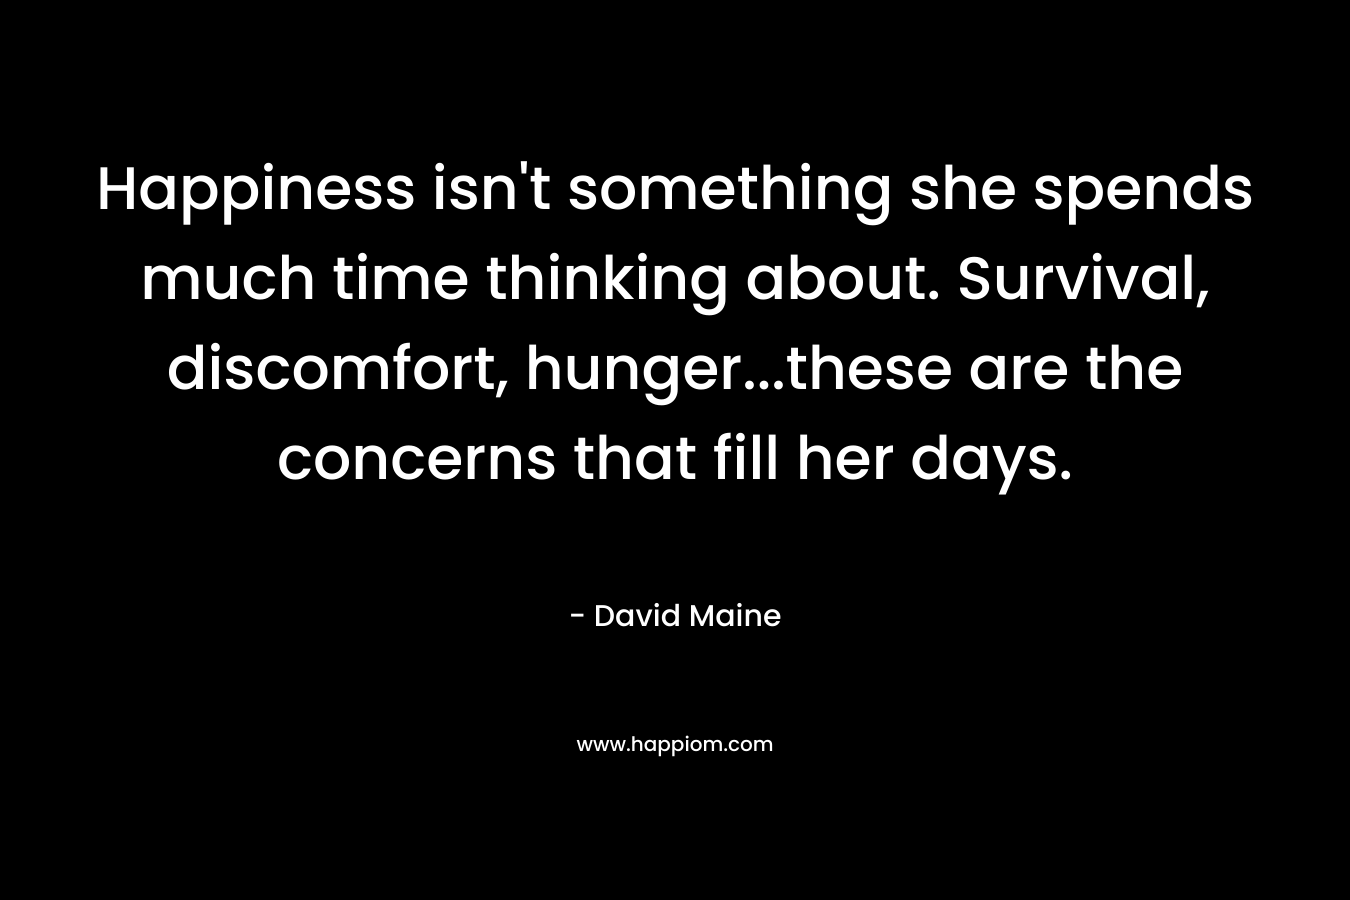 Happiness isn’t something she spends much time thinking about. Survival, discomfort, hunger…these are the concerns that fill her days. – David Maine